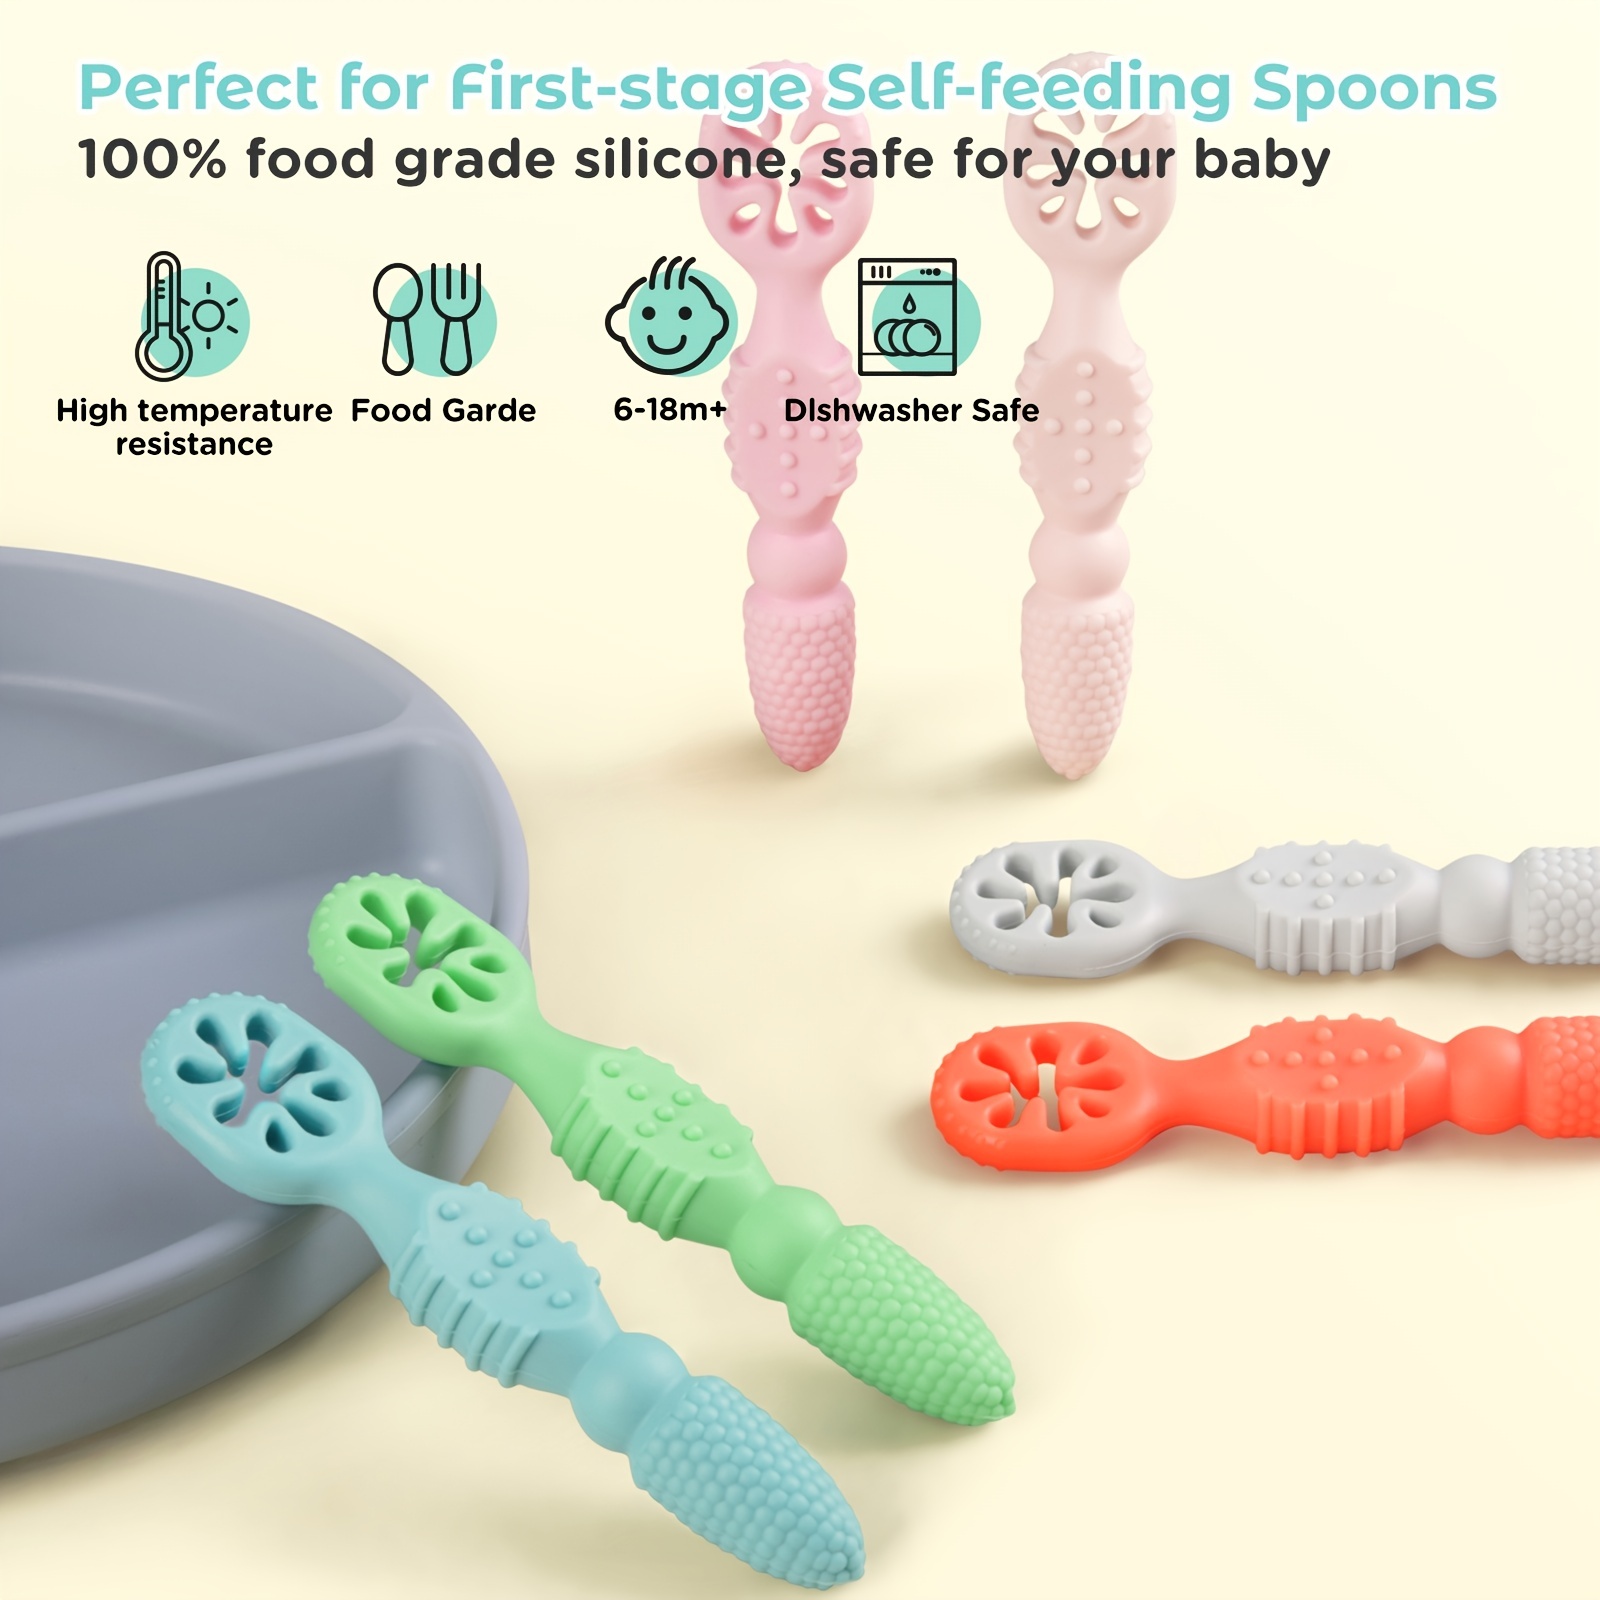 Baby Spoons - Self-feeding Toddler Utensils - First Stage Baby Led Wea